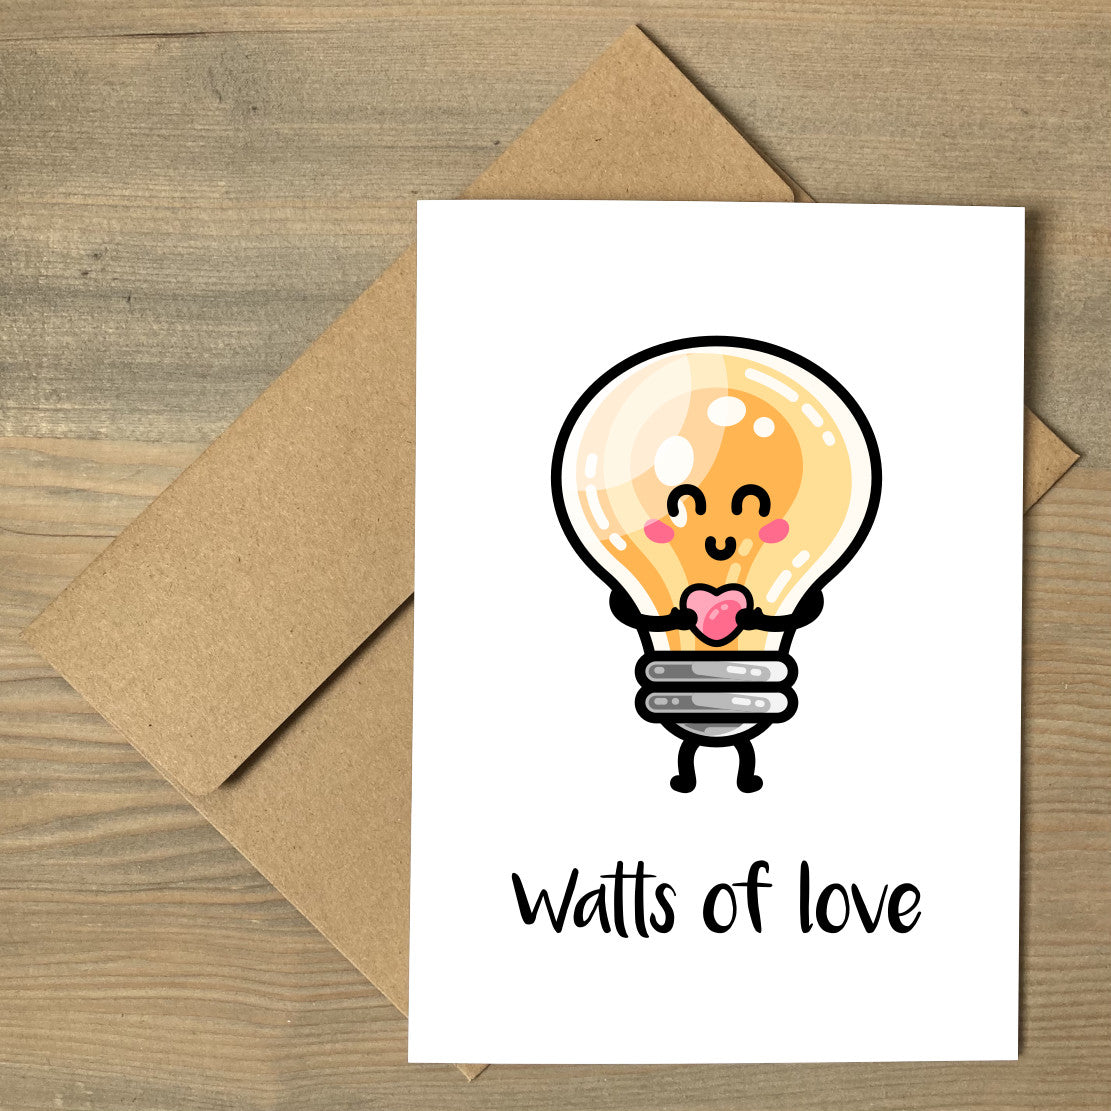 A white greeting card lying flat on a brown envelope, with a design of a kawaii cute lightbulb holding a heart and the words watts of love beneath